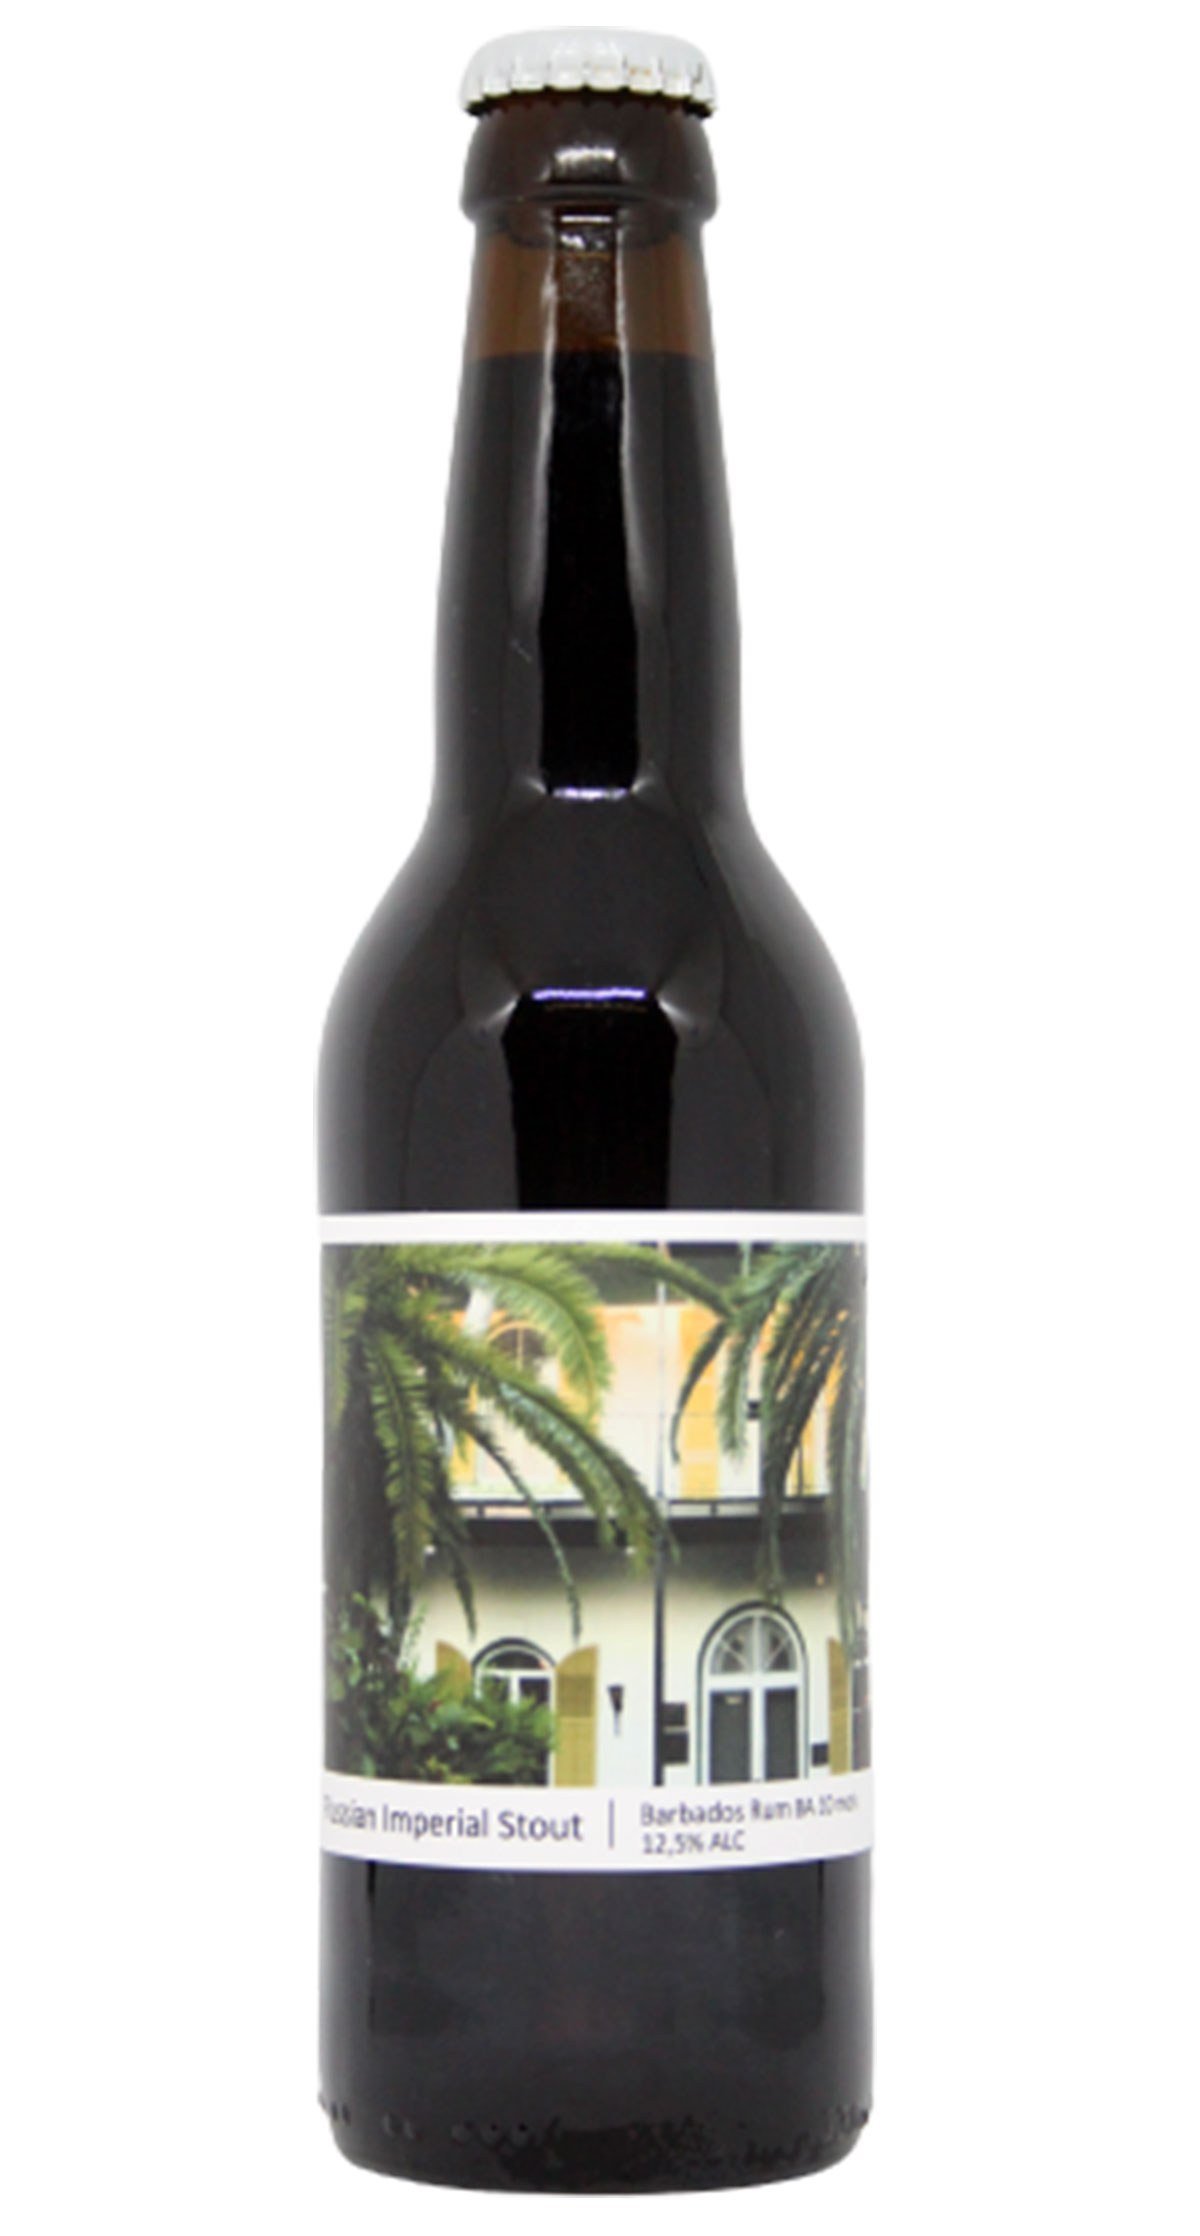 RUSSIAN IMPERIAL STOUT - Barbados Rum BA 10 Mois